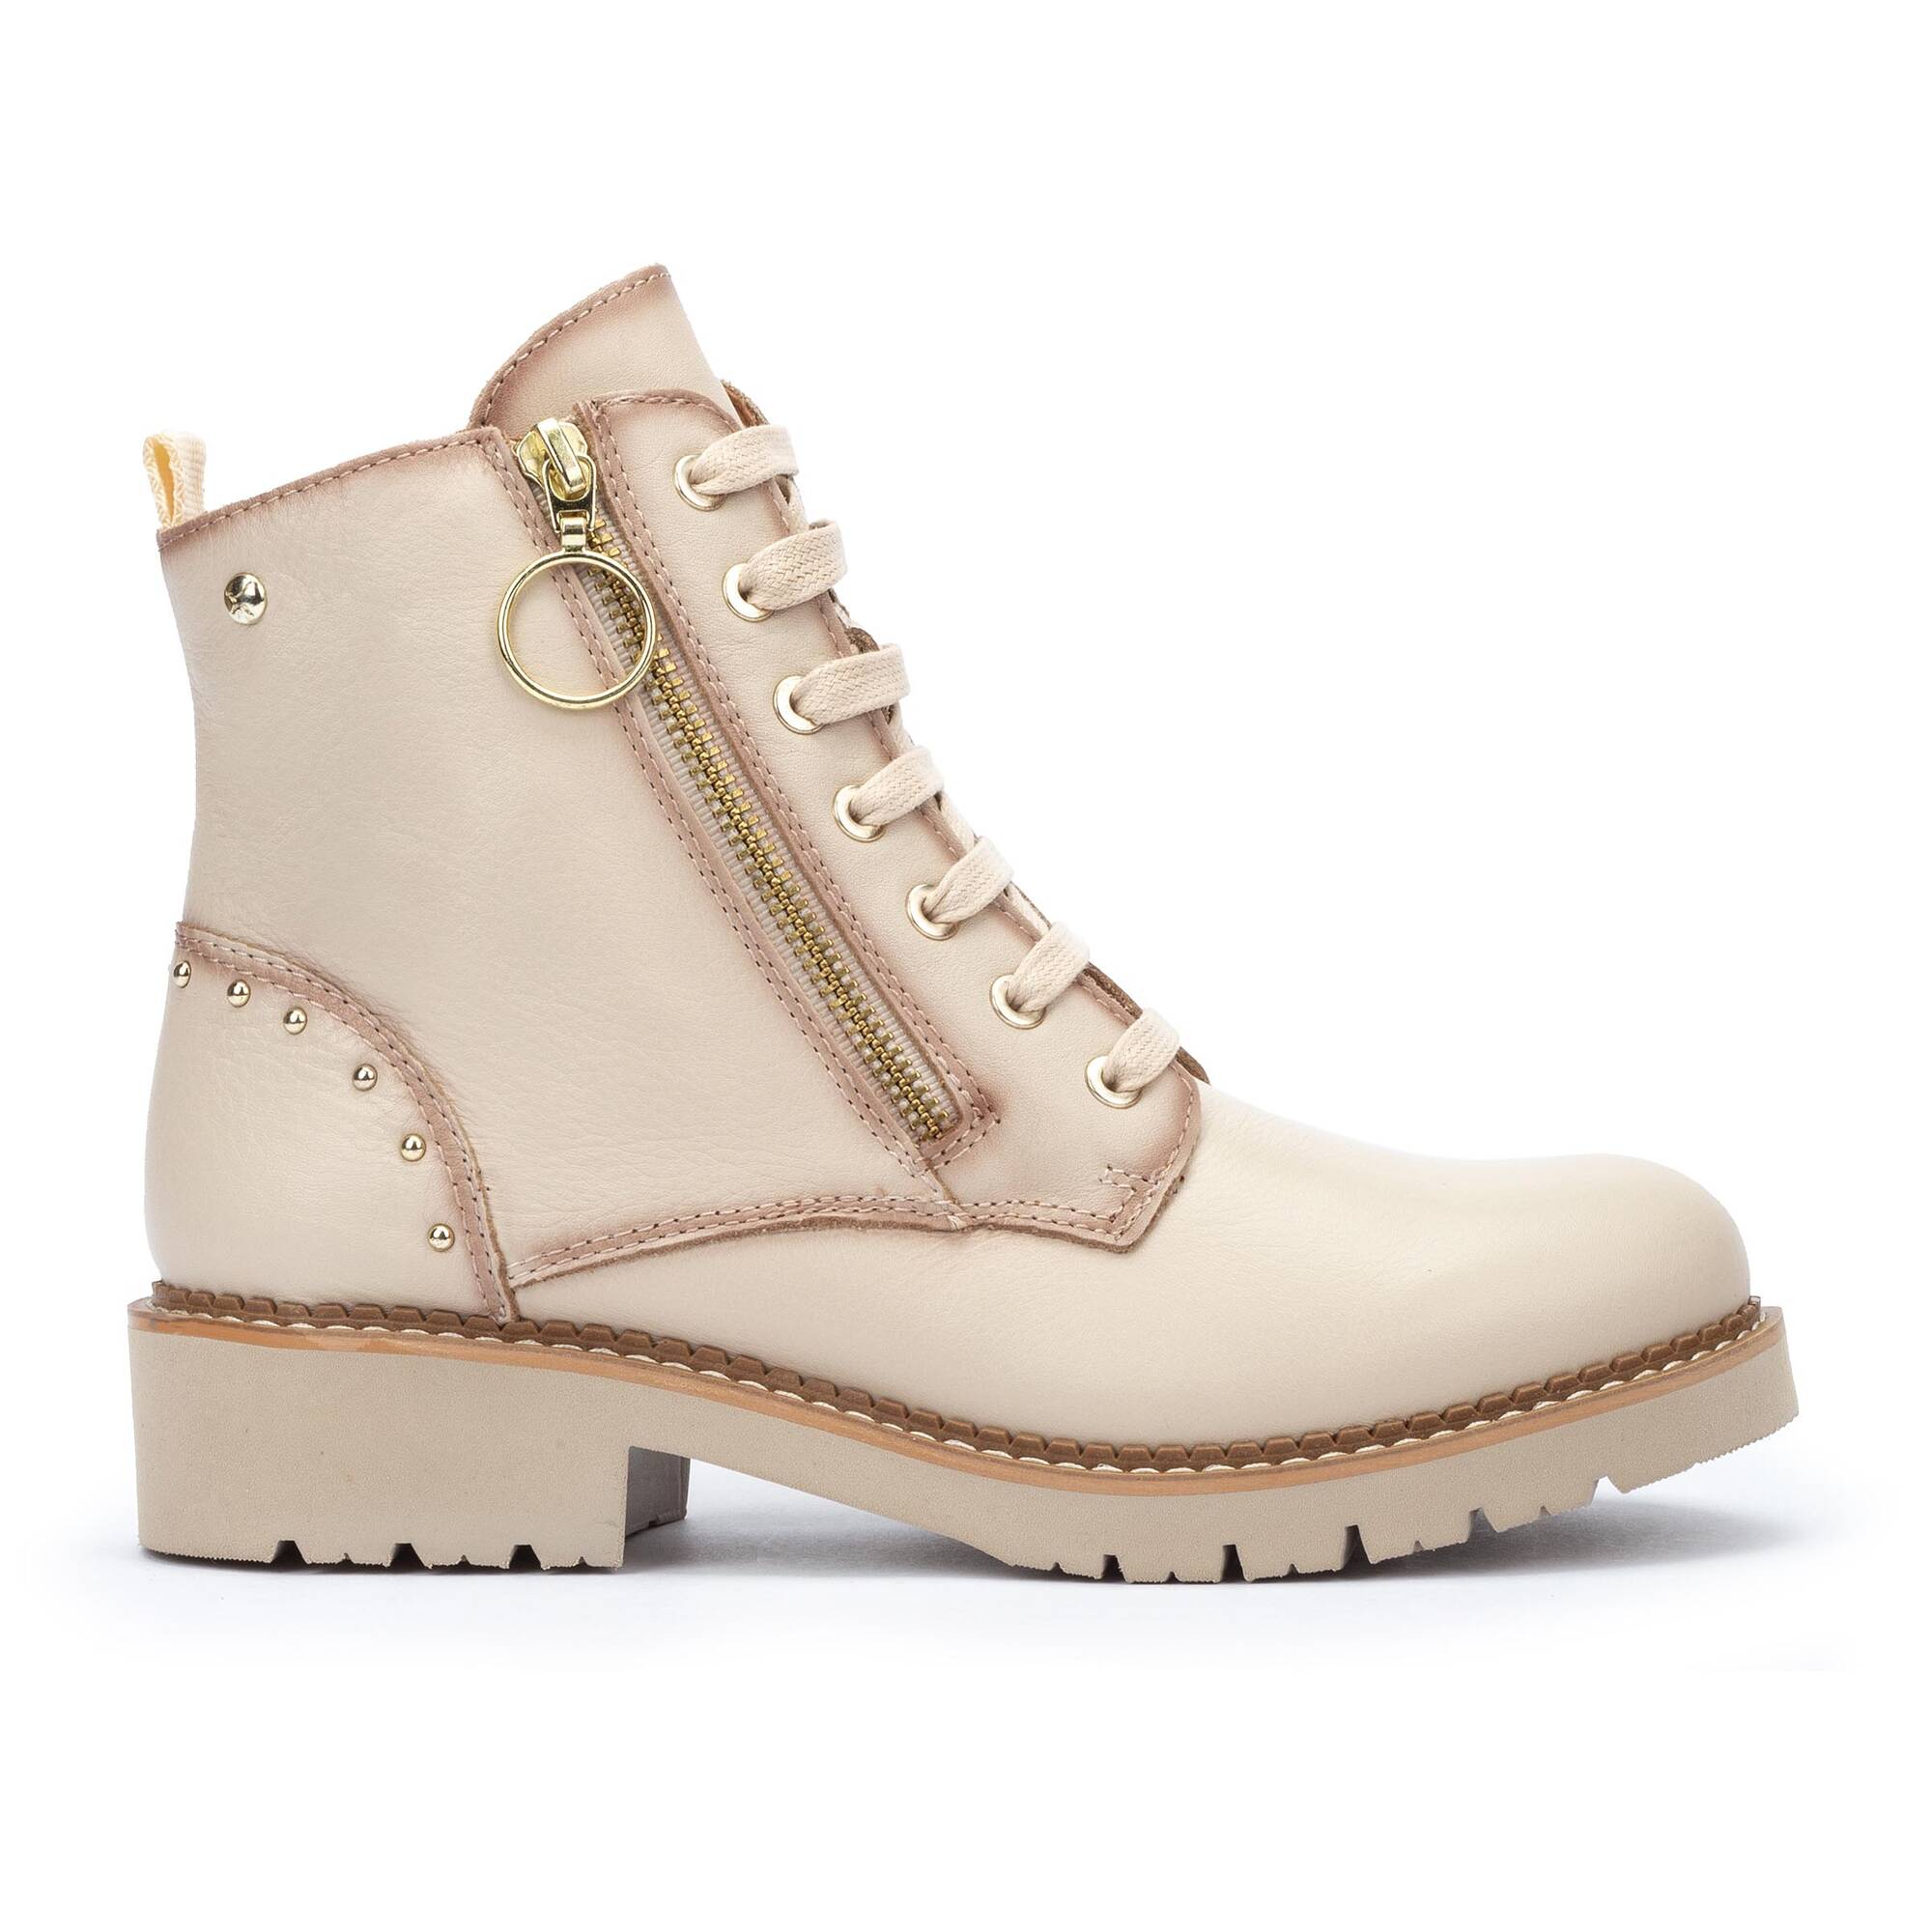 Ankle boots | VICAR W0V-8610C1, MARFIL, large image number 10 | null